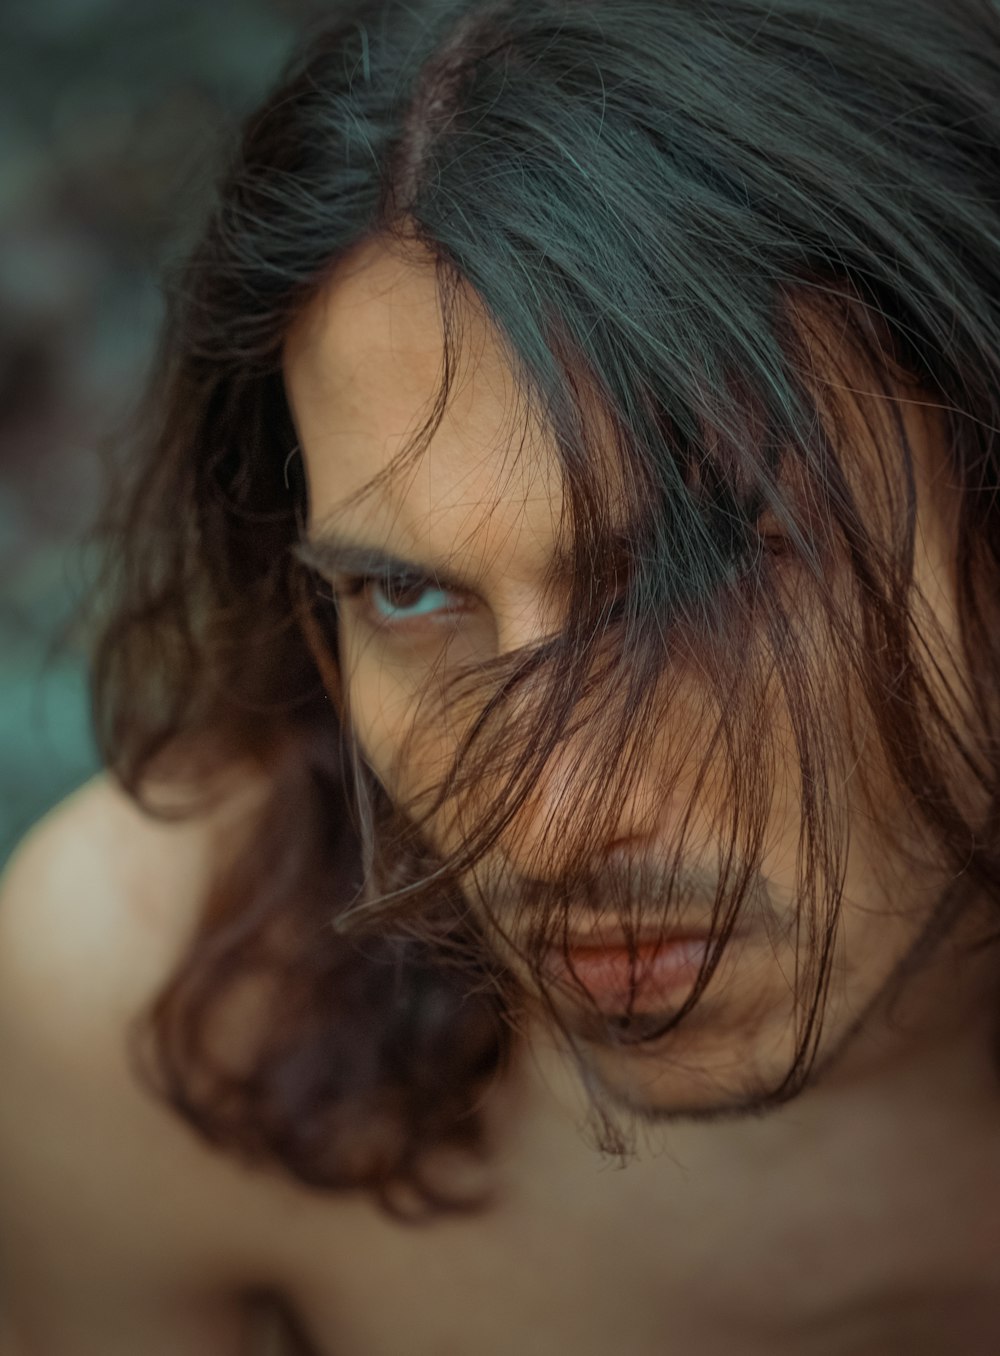 a close up of a person with long hair